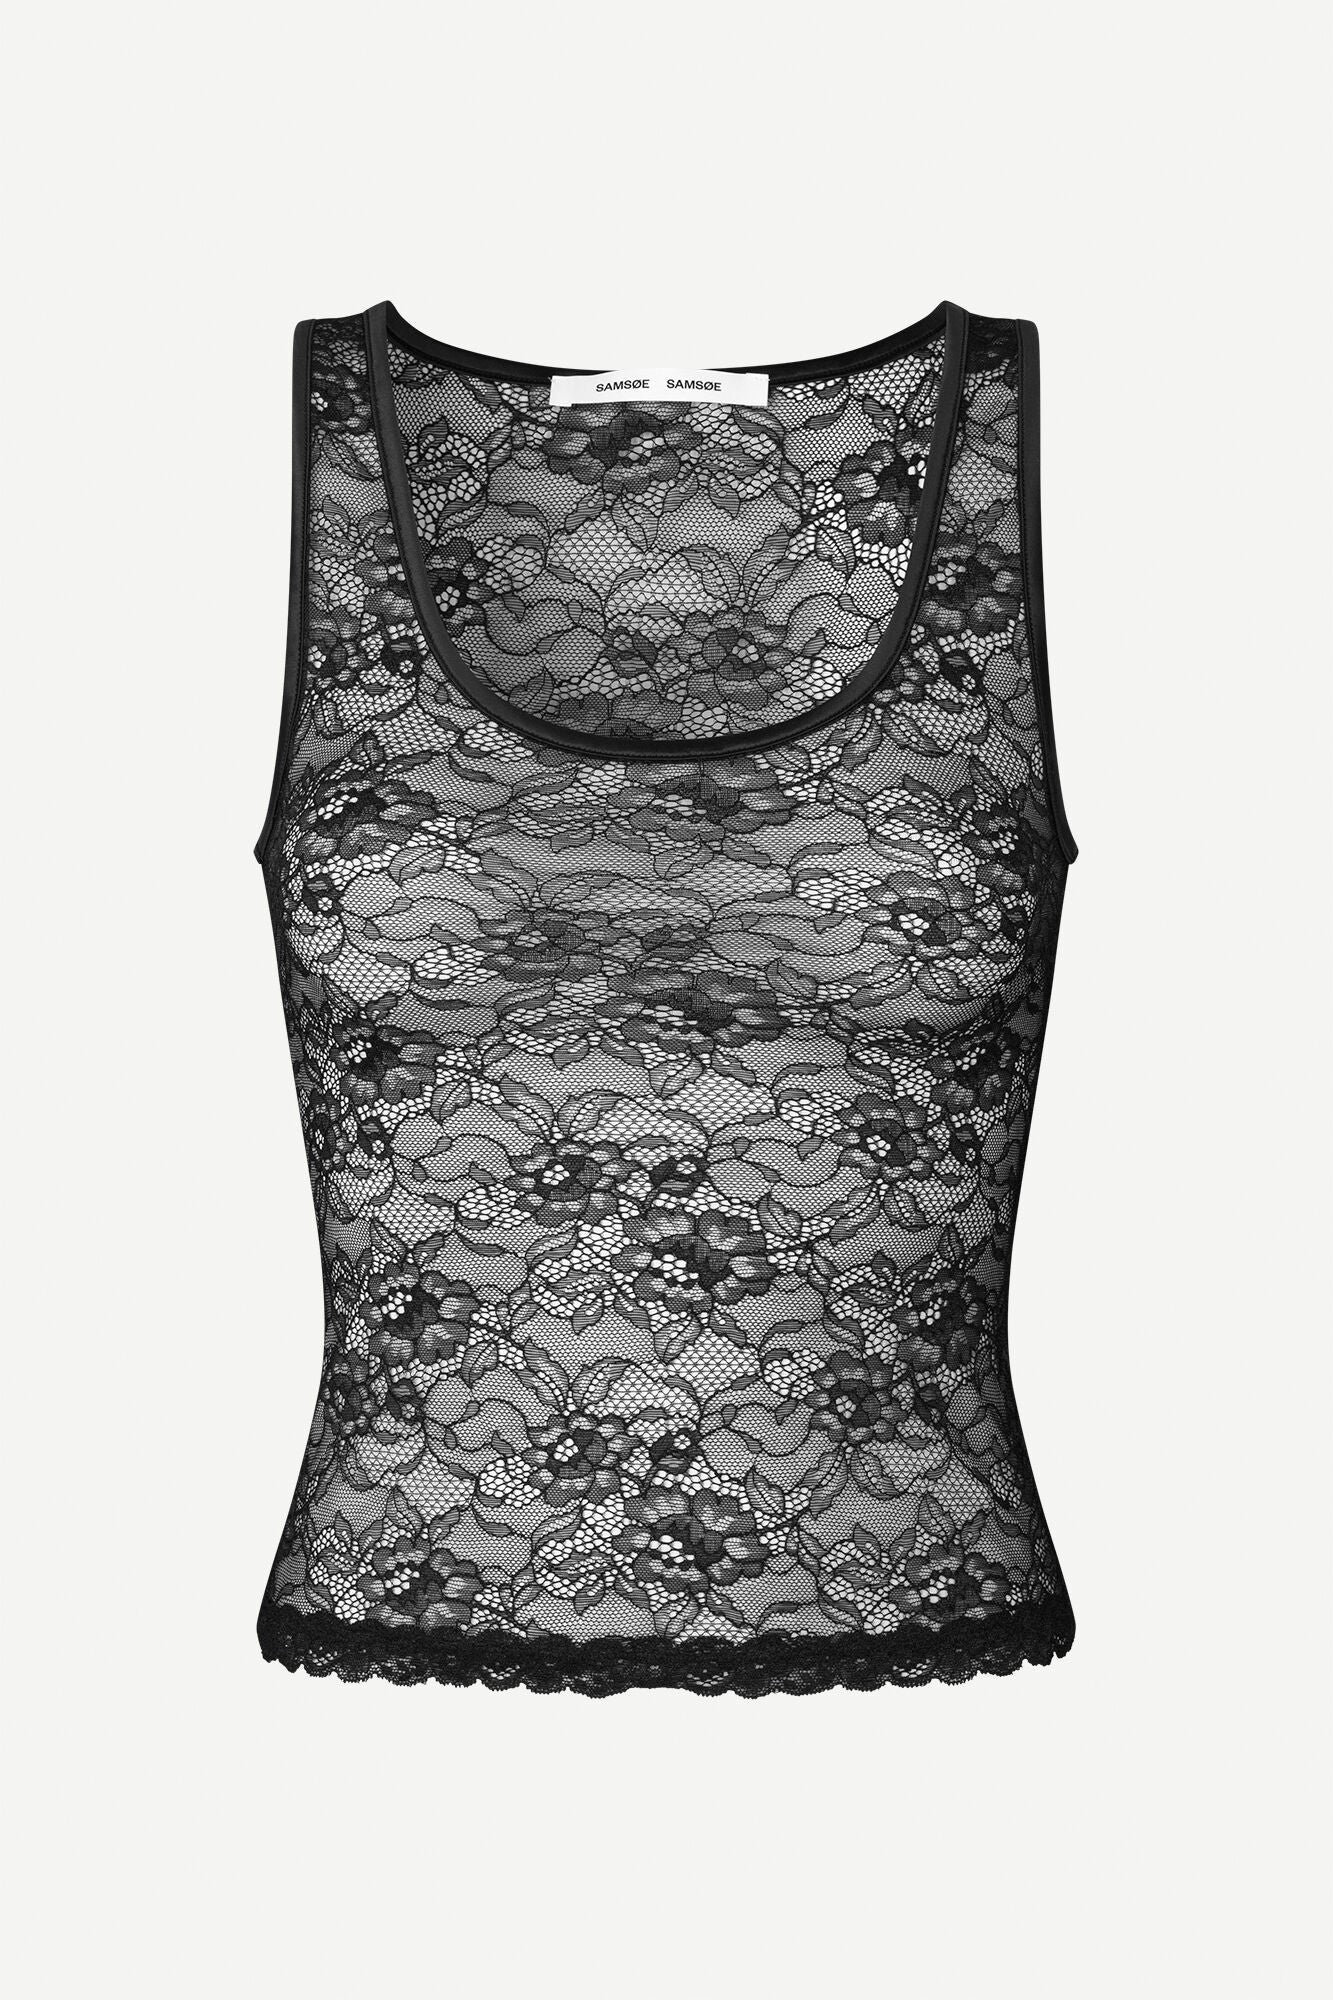 Lace tank top in black